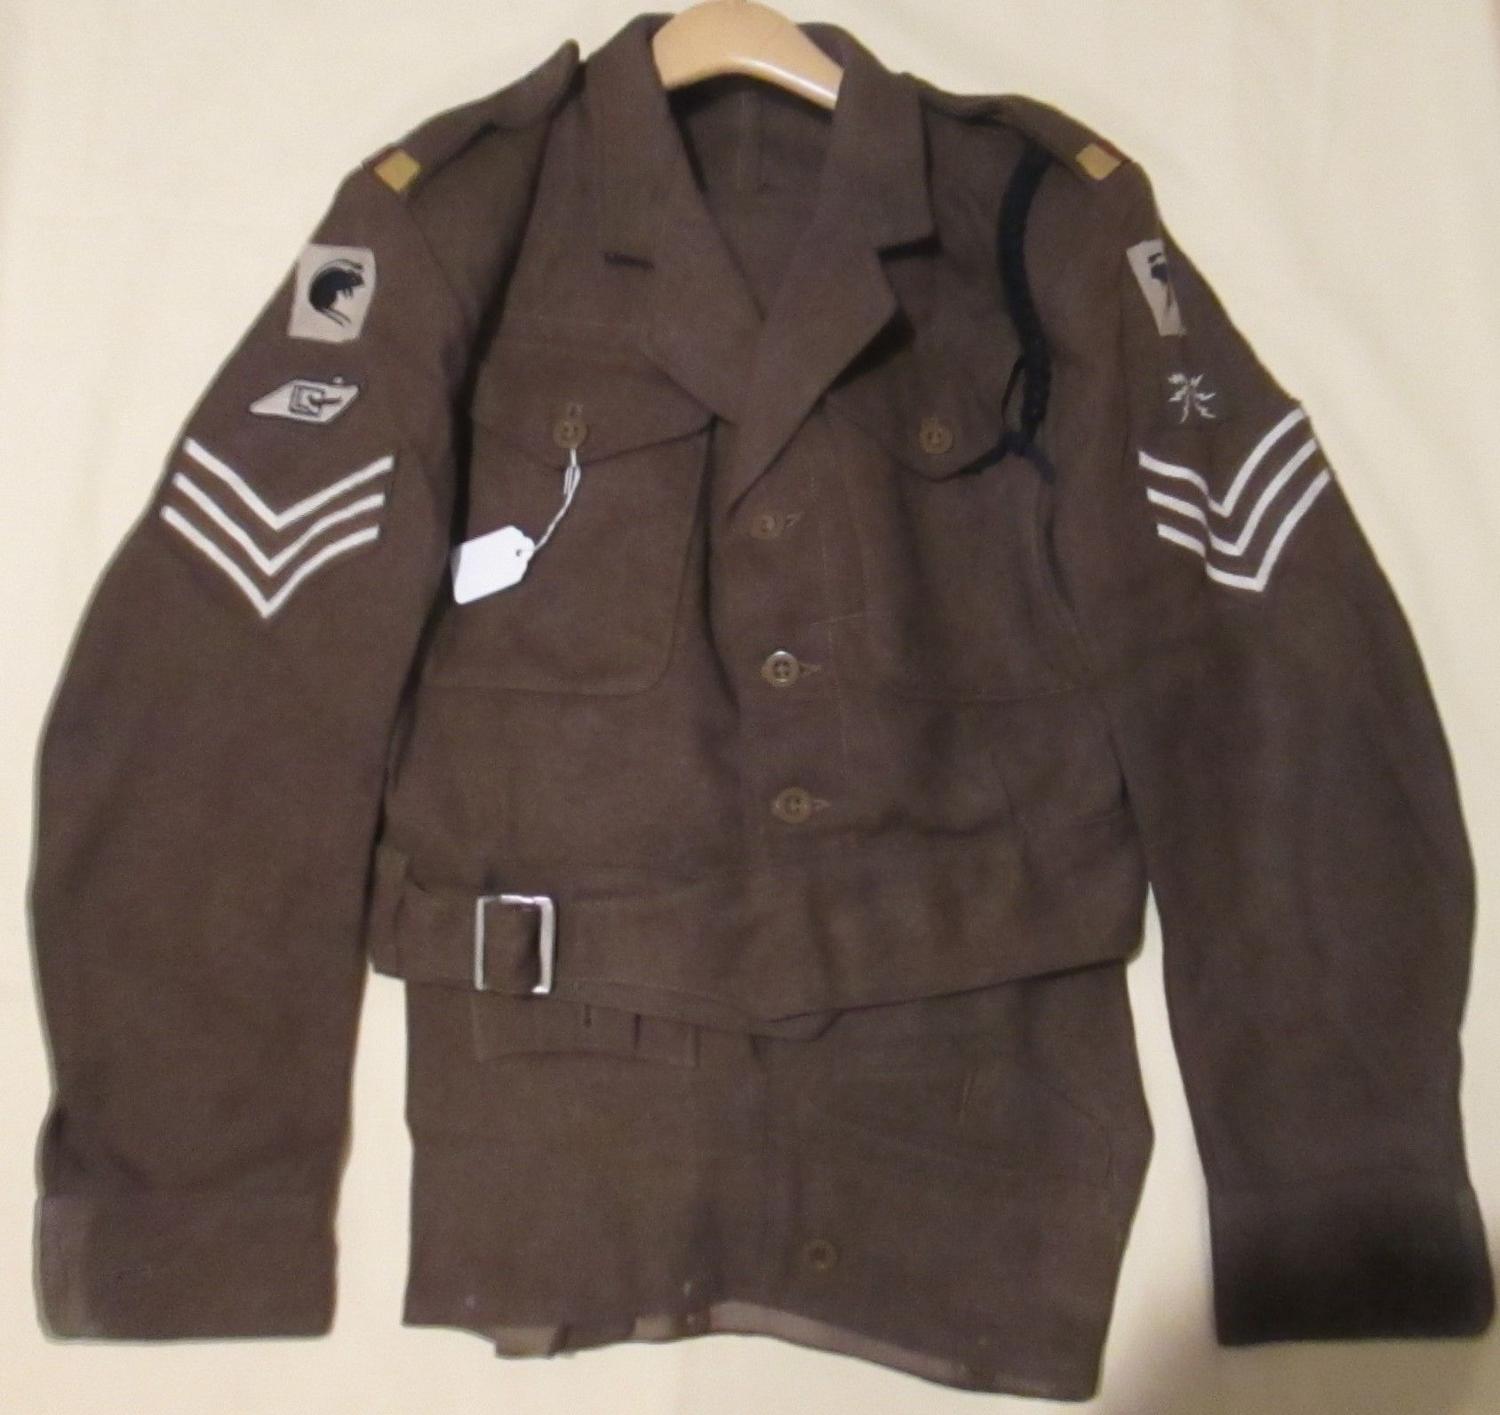 A GOOD EARLY POST WWII 2ND RTR SGTS UNIFORM